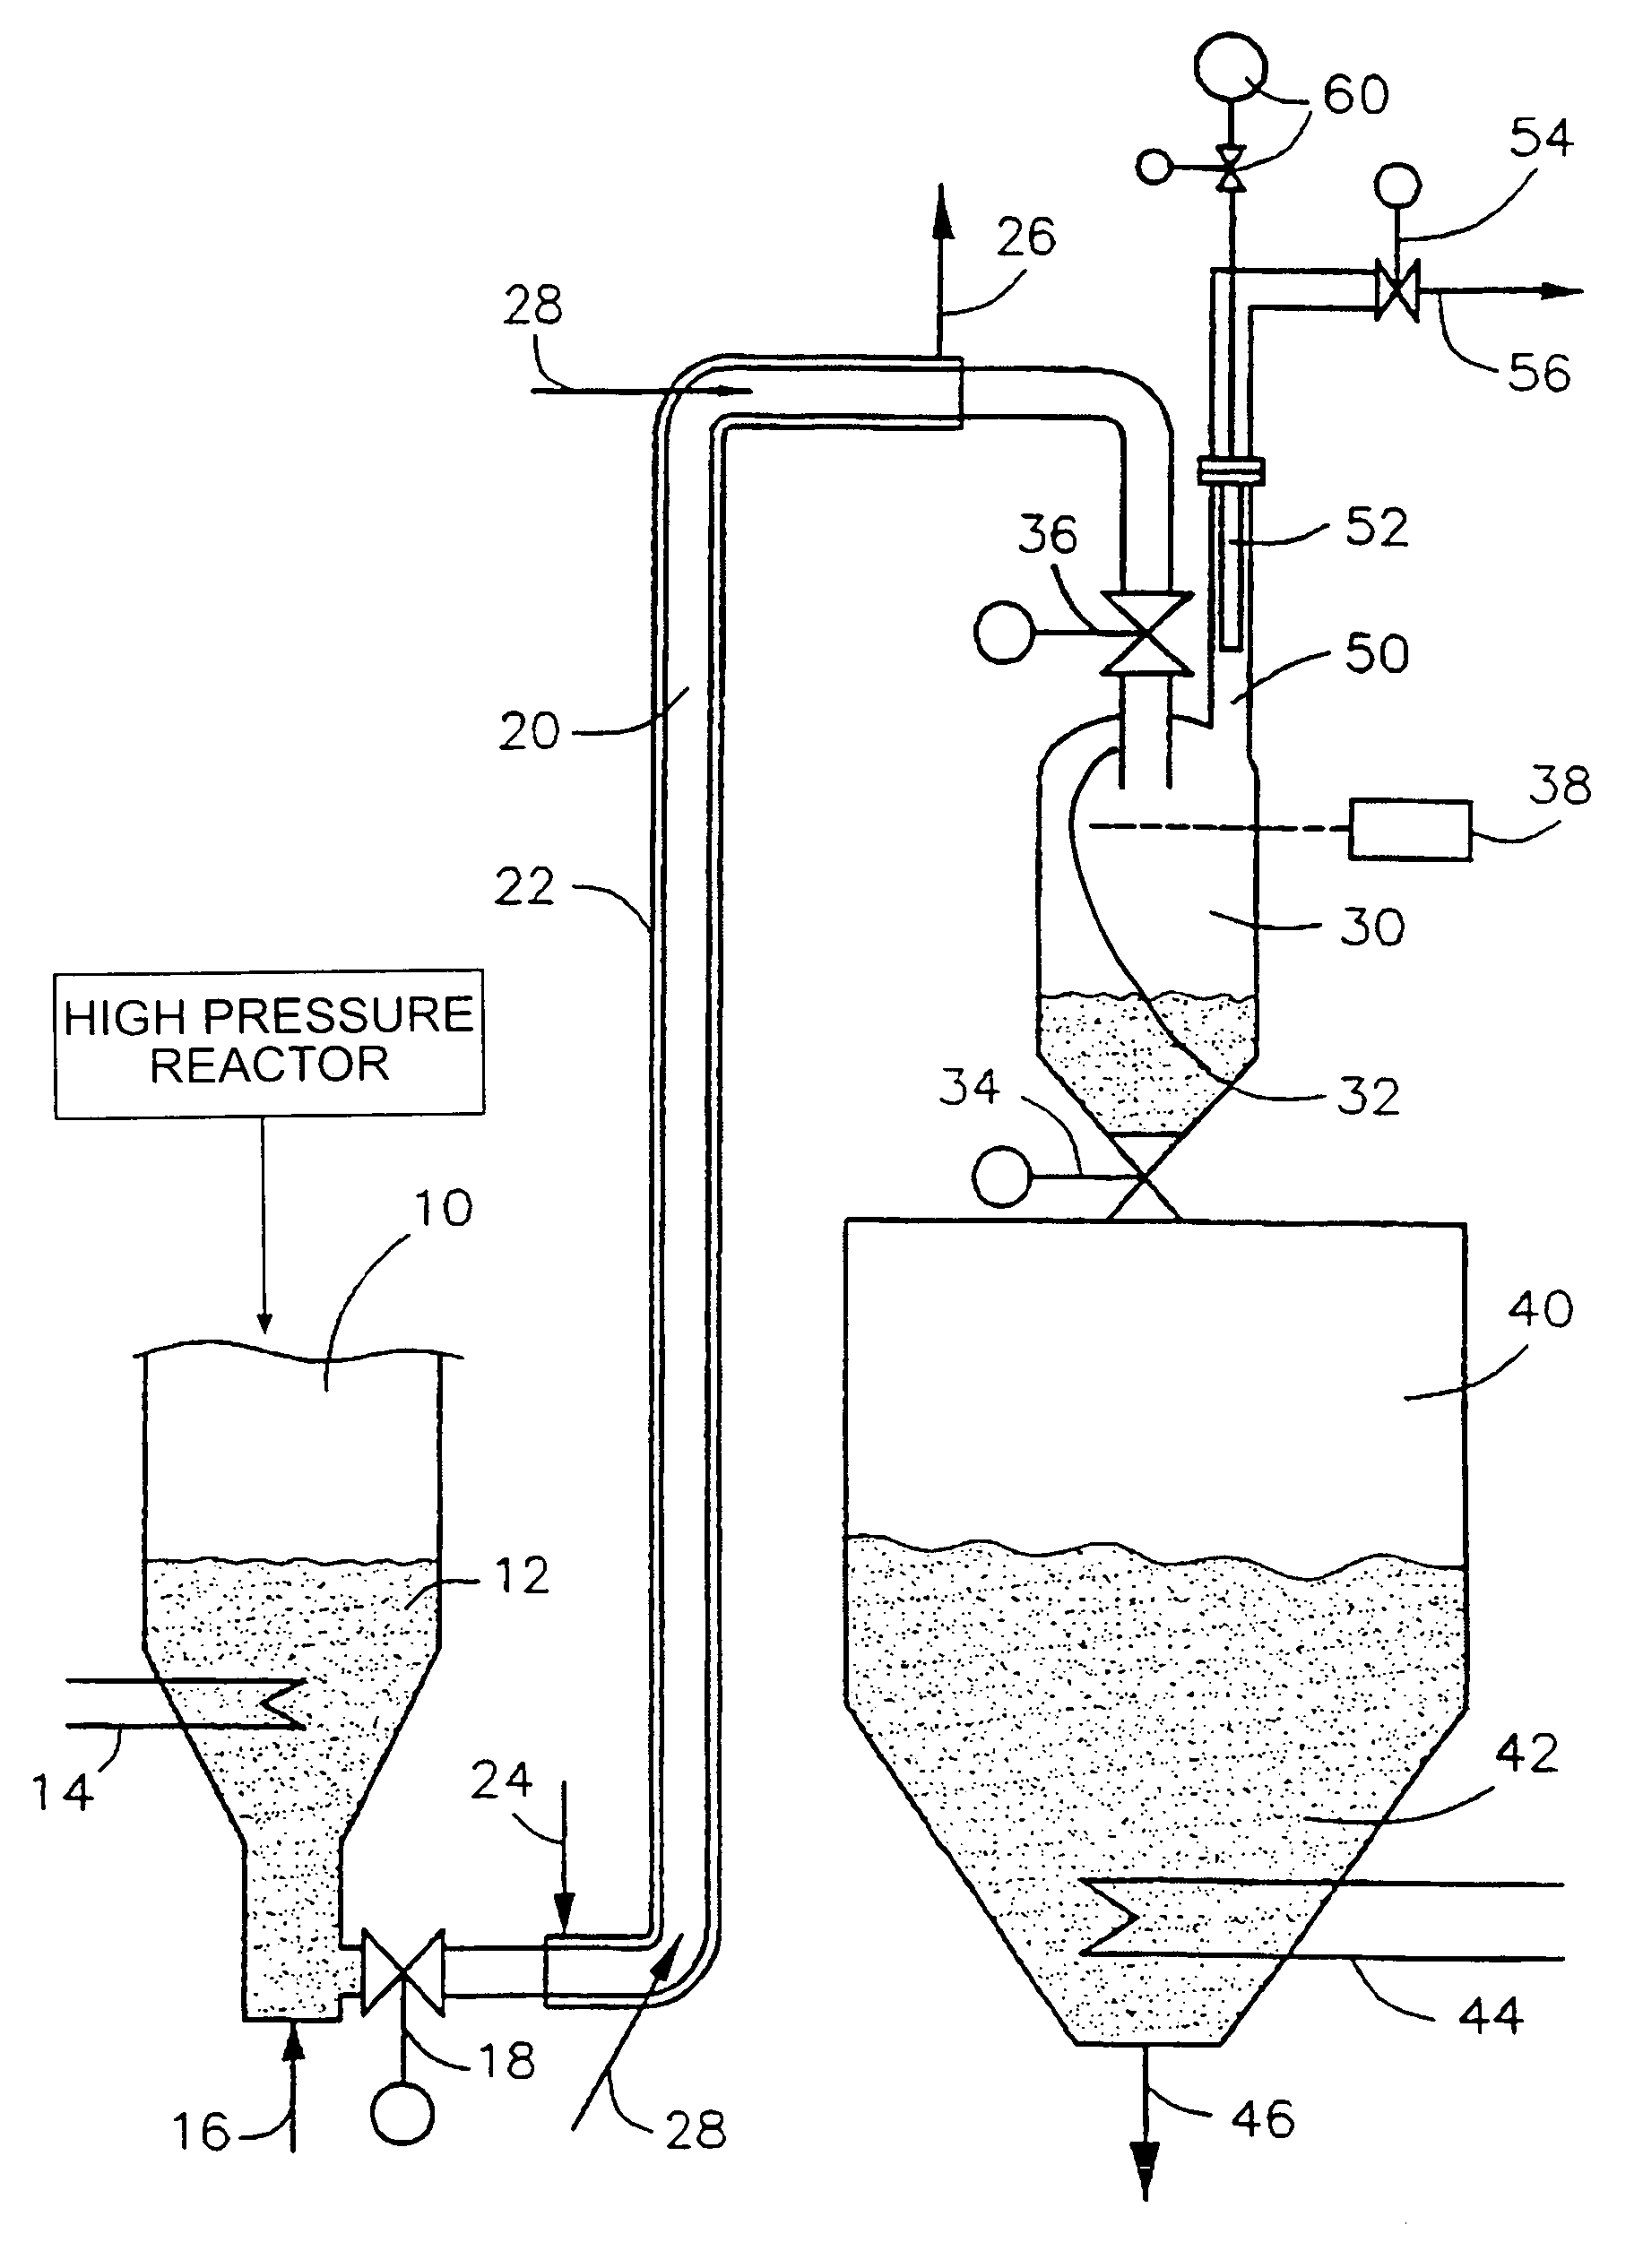 Method and apparatus for treating high pressure particulate material